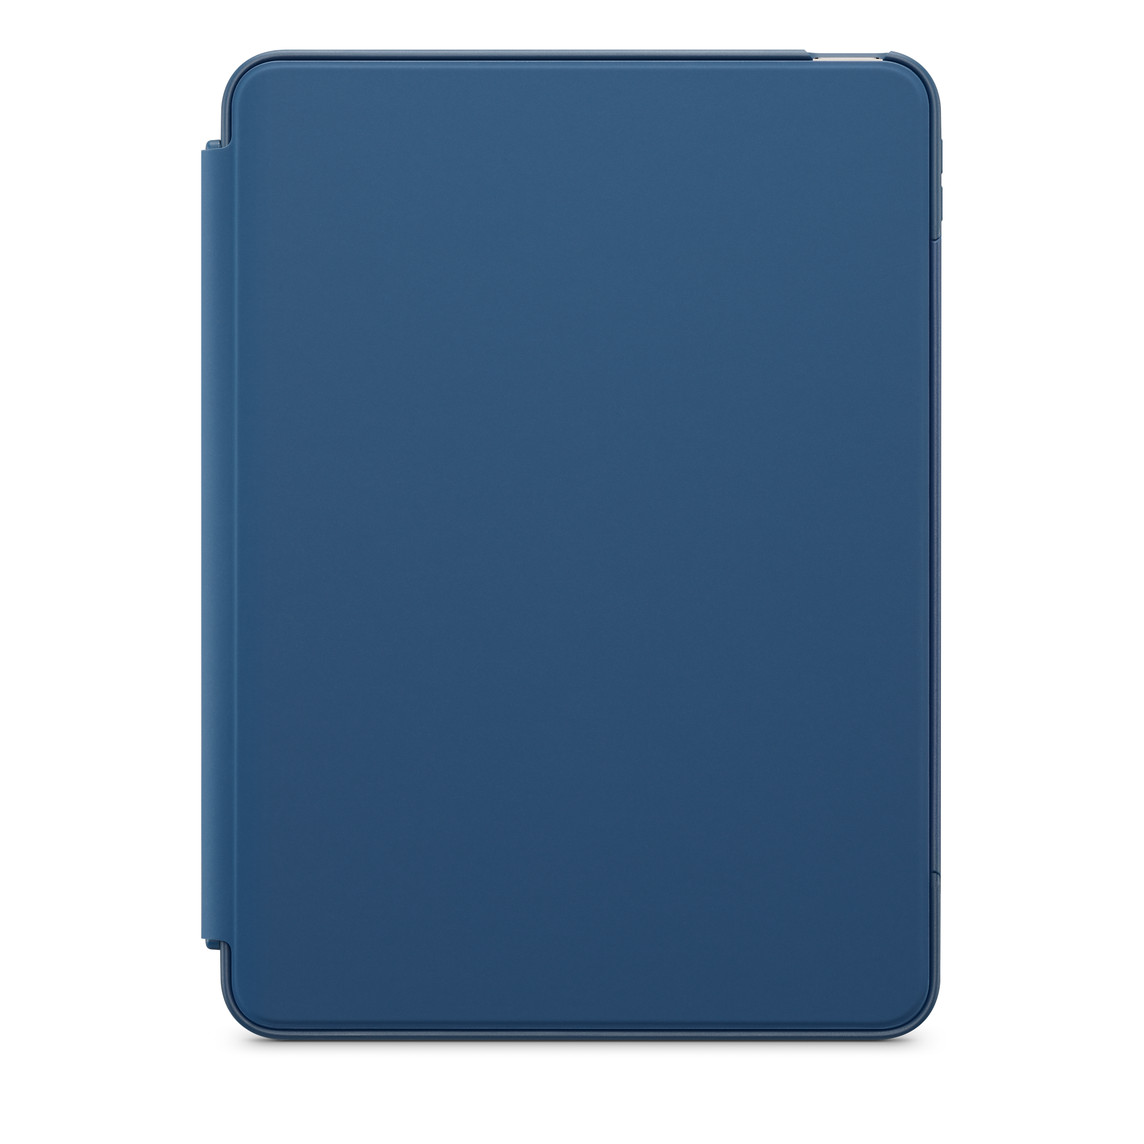 Front exterior, cover over iPad Air in case